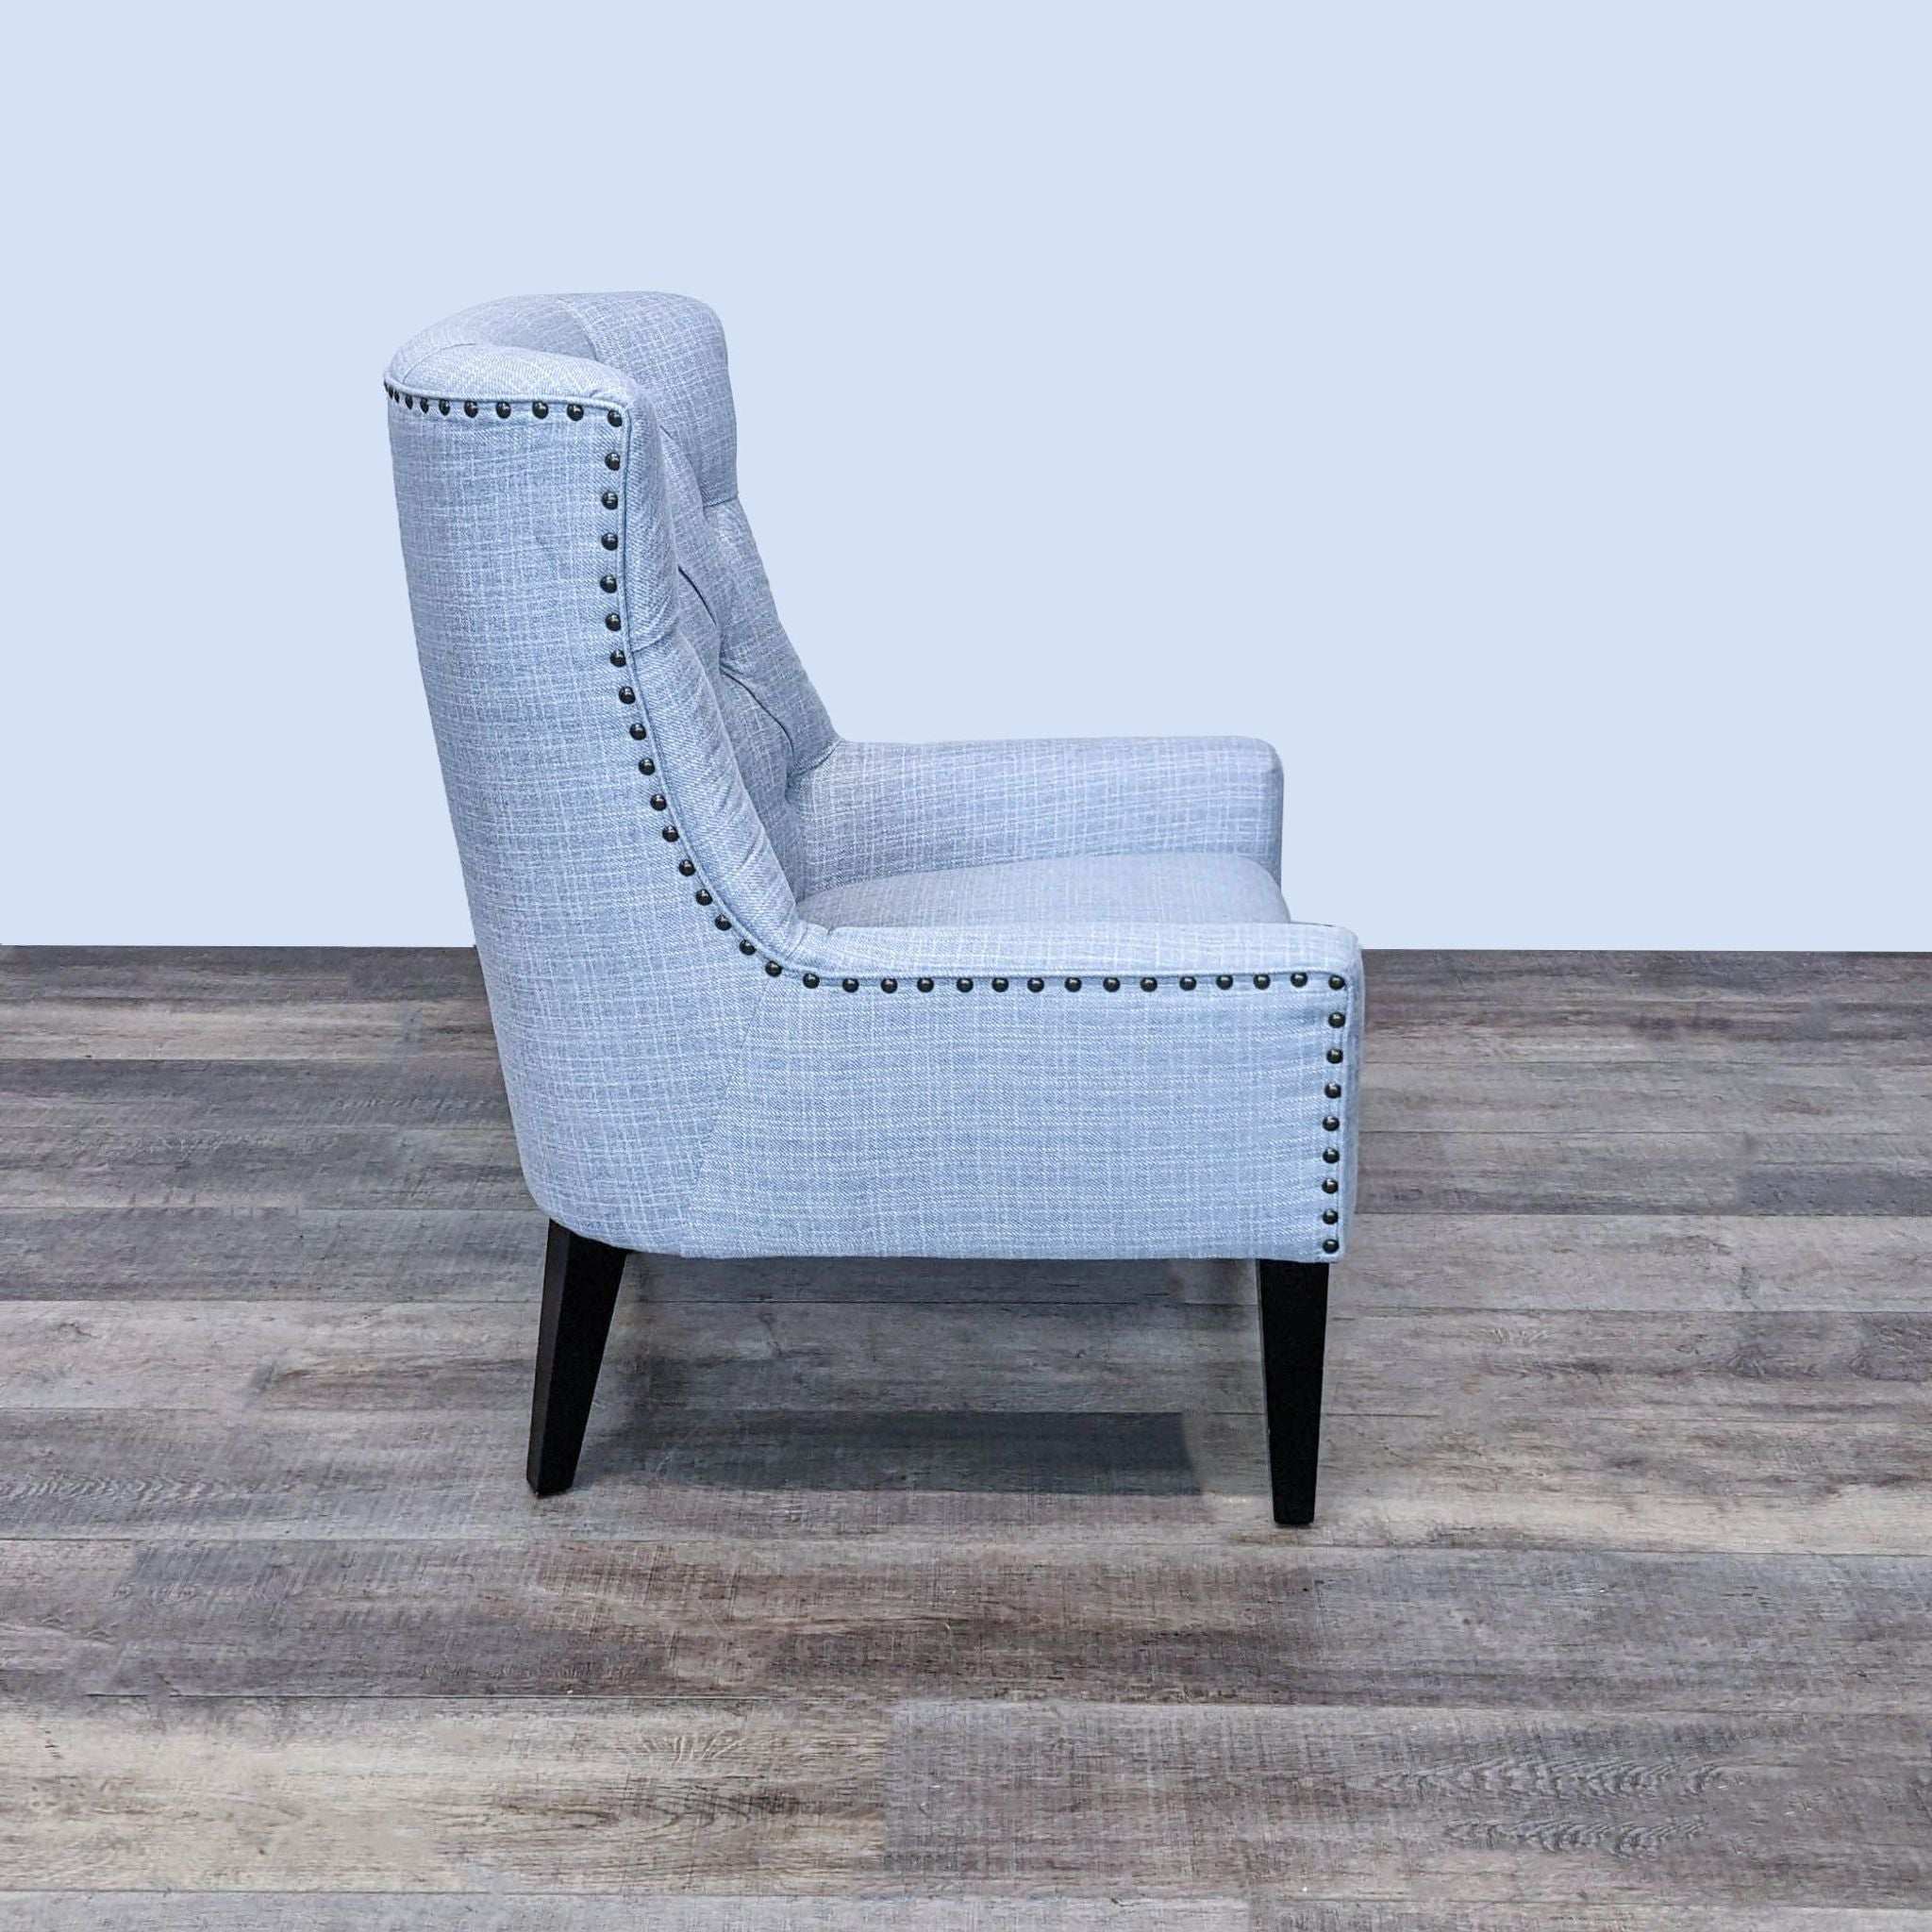 Pier 1 elegant lounge chair showcasing side angle with nailhead trim and curve detailing on light fabric.